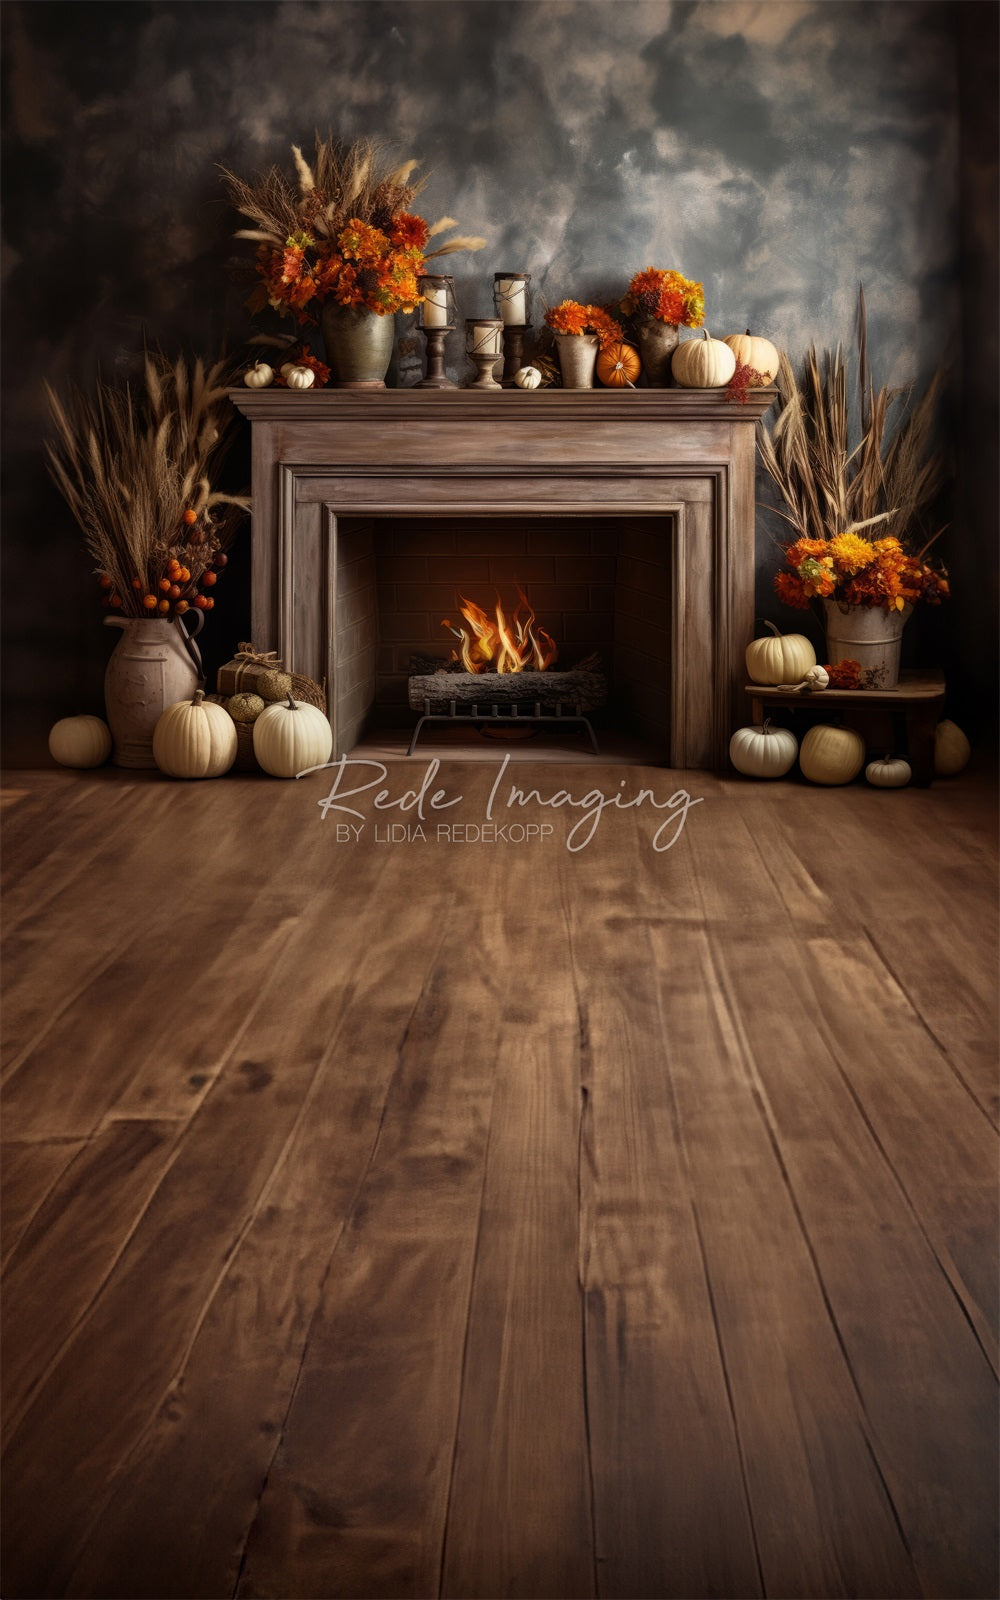 Scenes from Backdrops of Fireplace: Lidia Redekopp's Autumn Sweeps